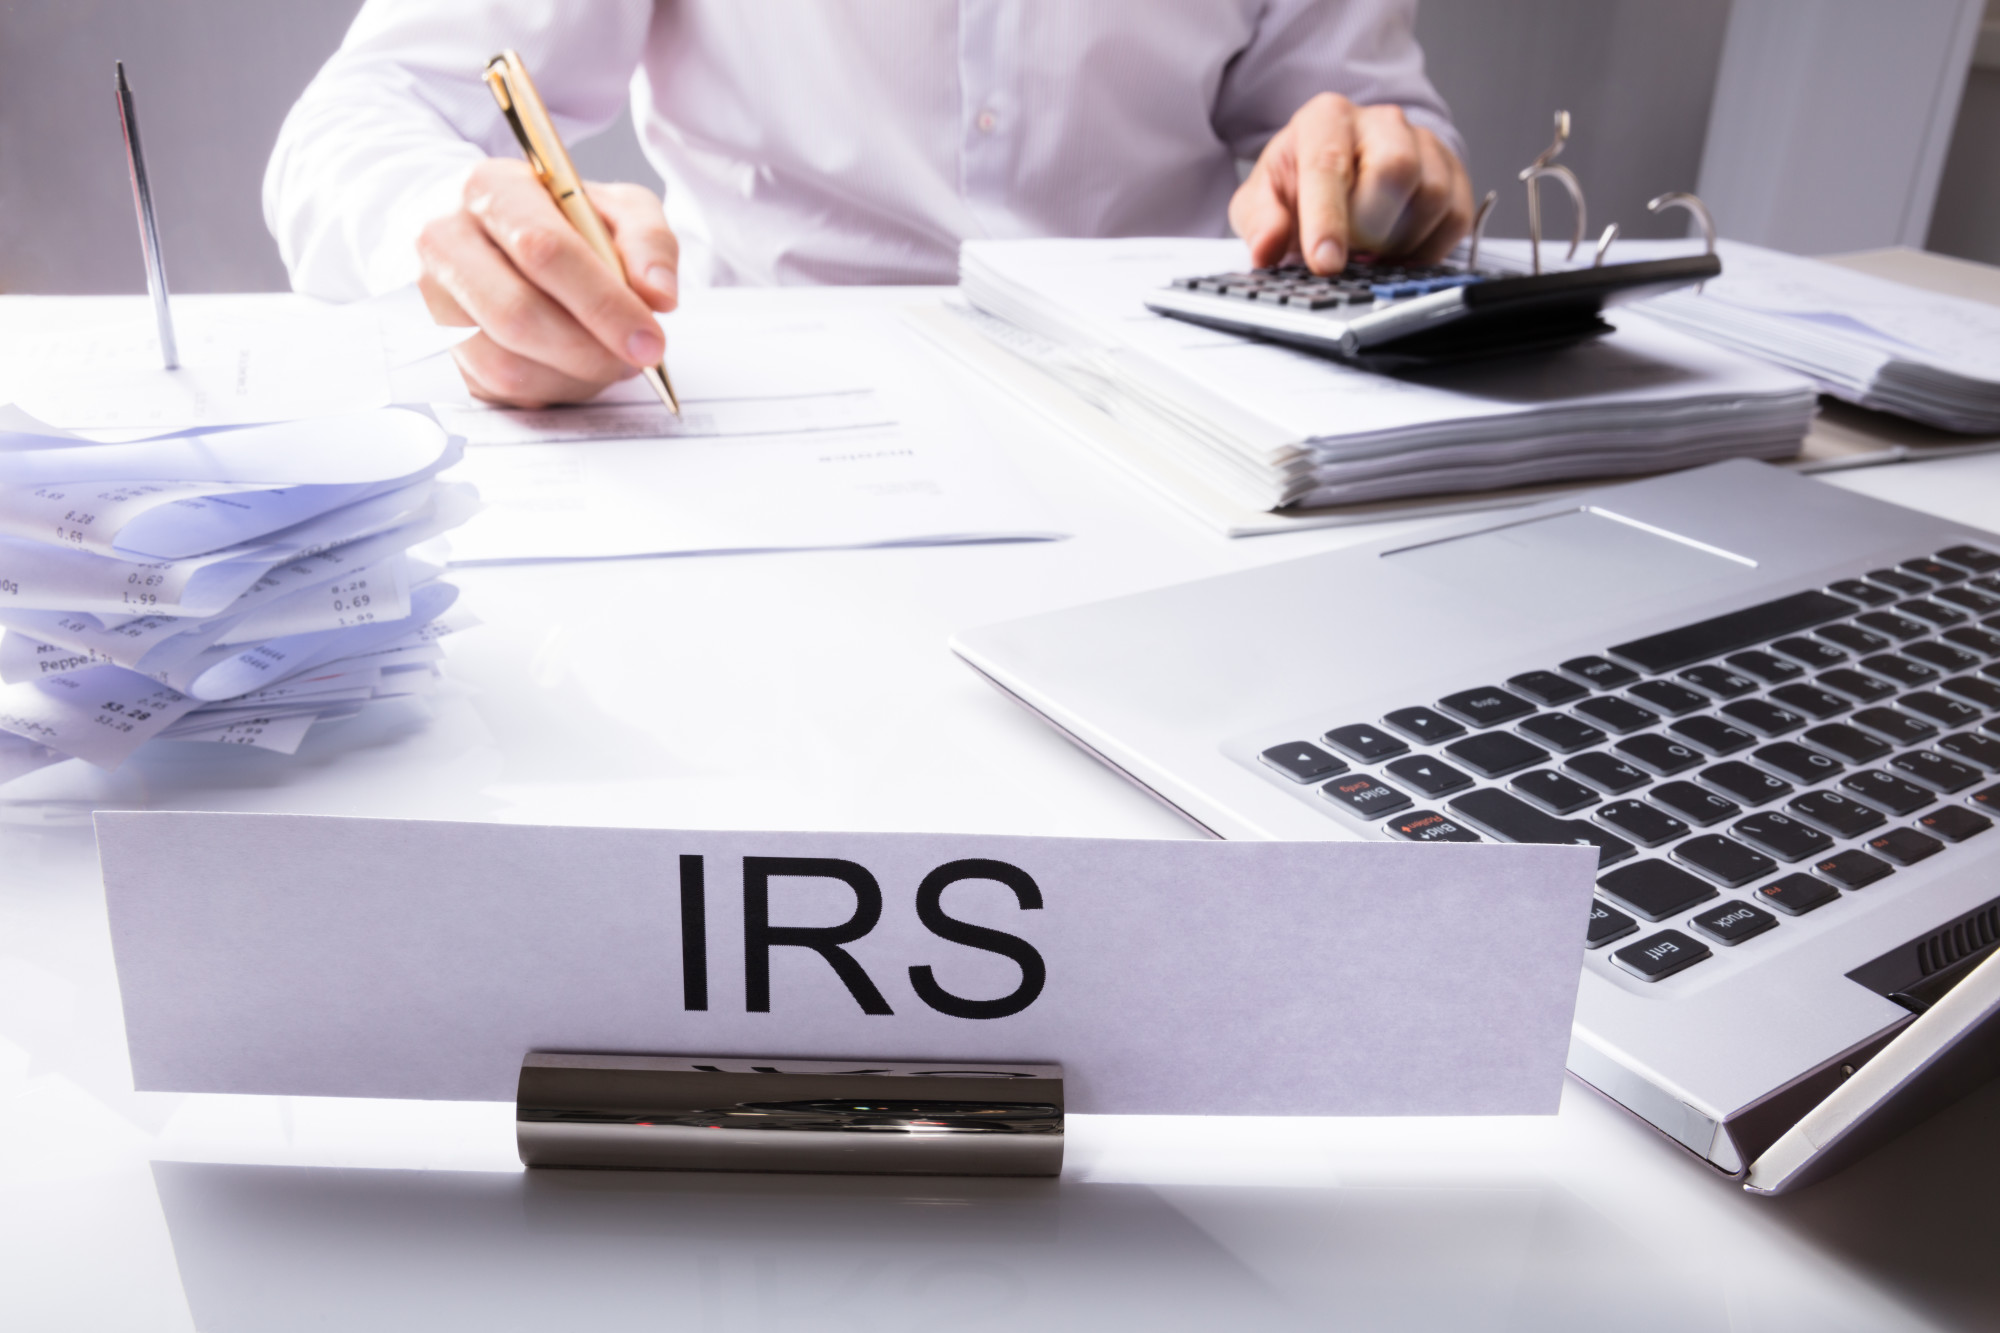 As an individual or business owner, it is important to stay out of trouble with the IRS. Here are a few tips to help you avoid IRS problems.